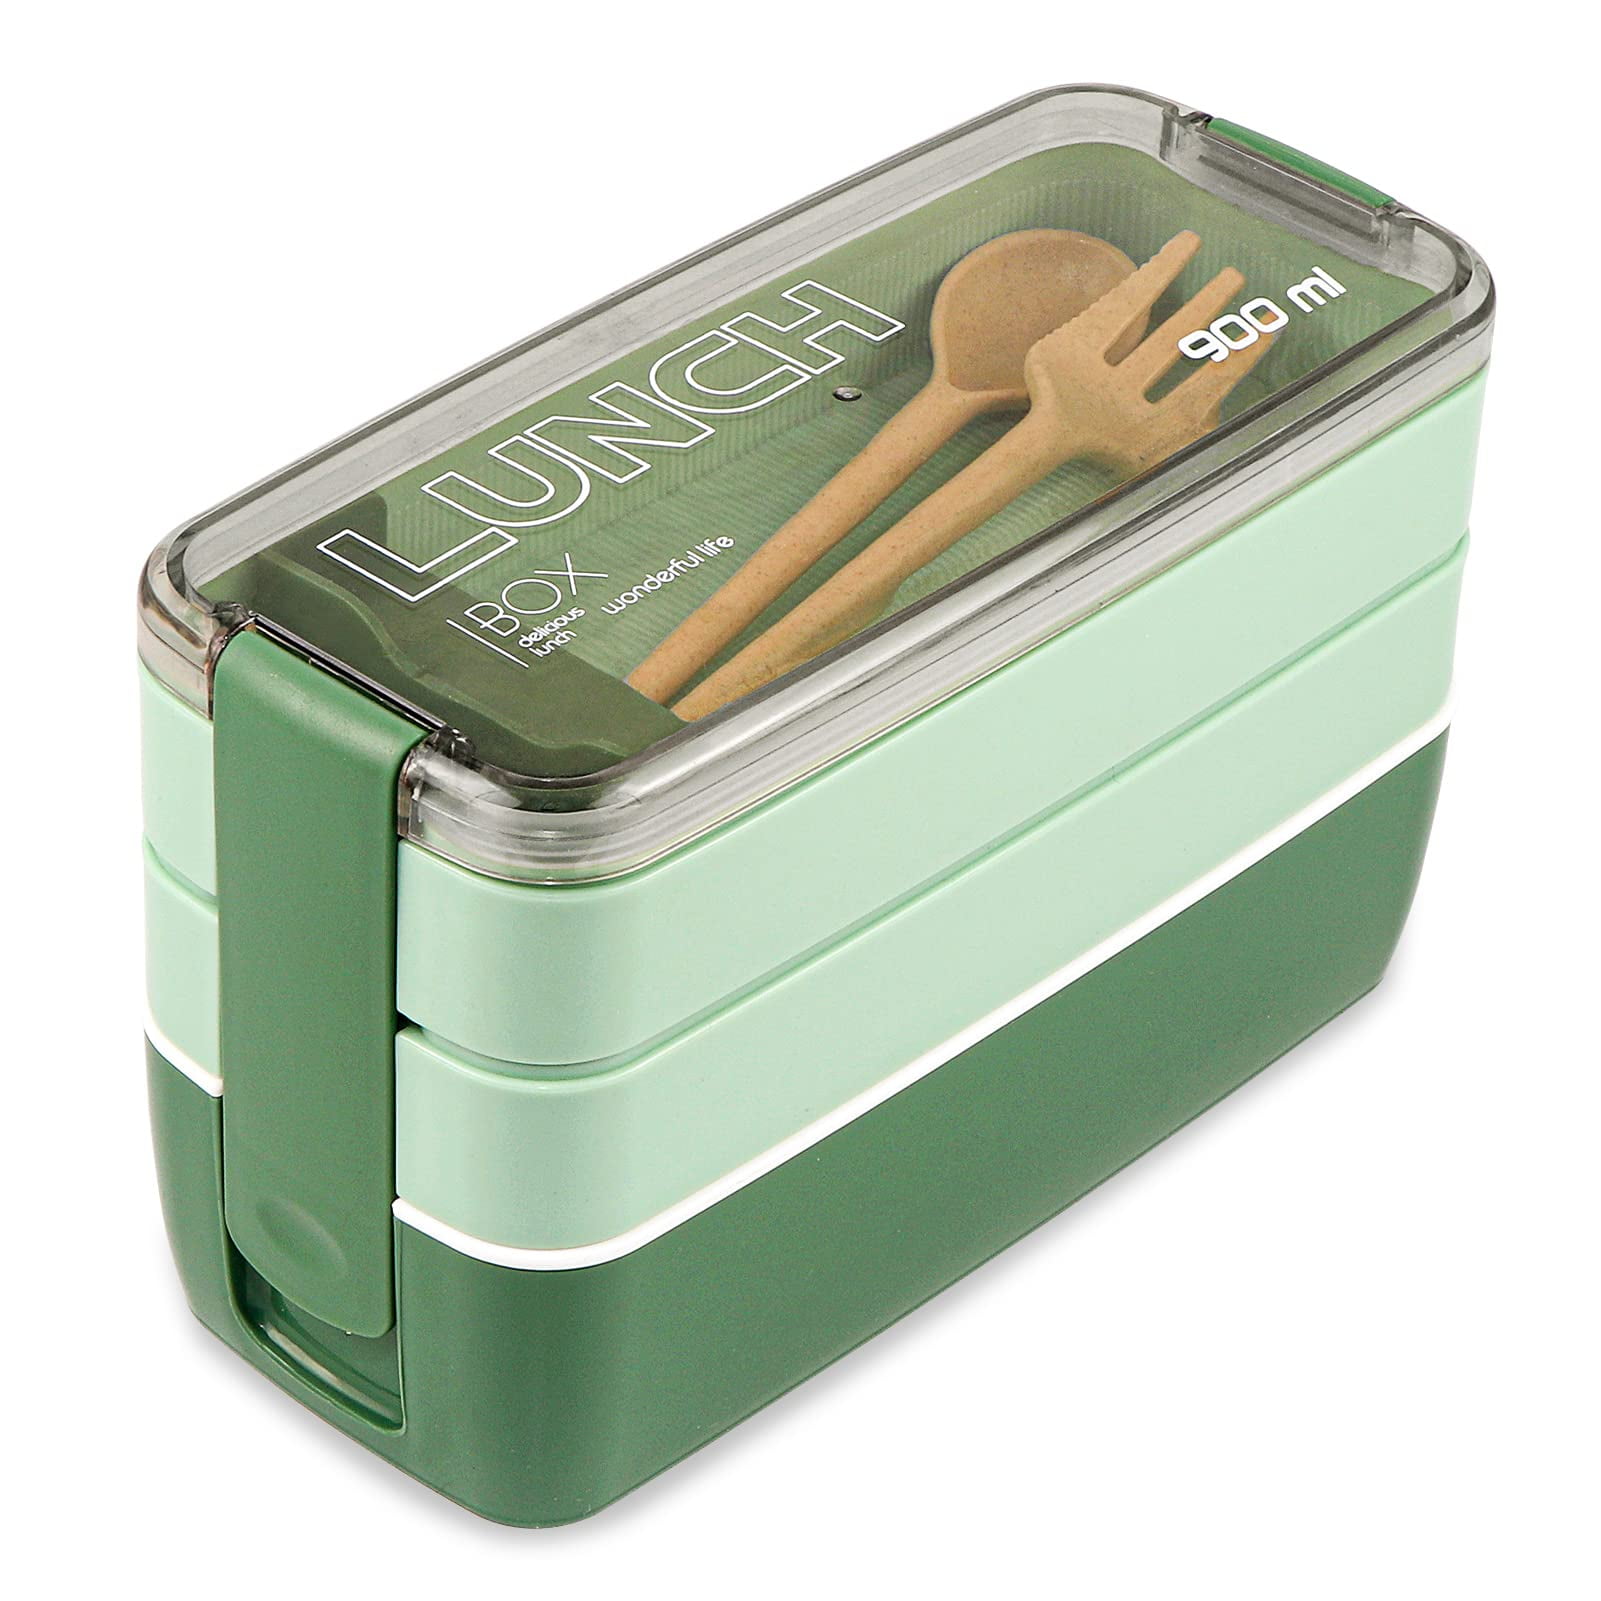  Rarapop Stackable Bento Lunch Box Kit, 3-In-1 Compartment Wheat  Straw Lunch Containers with Tableware, Reusable On-the-Go Meal and Snack  Containers(Morandi Green): Home & Kitchen